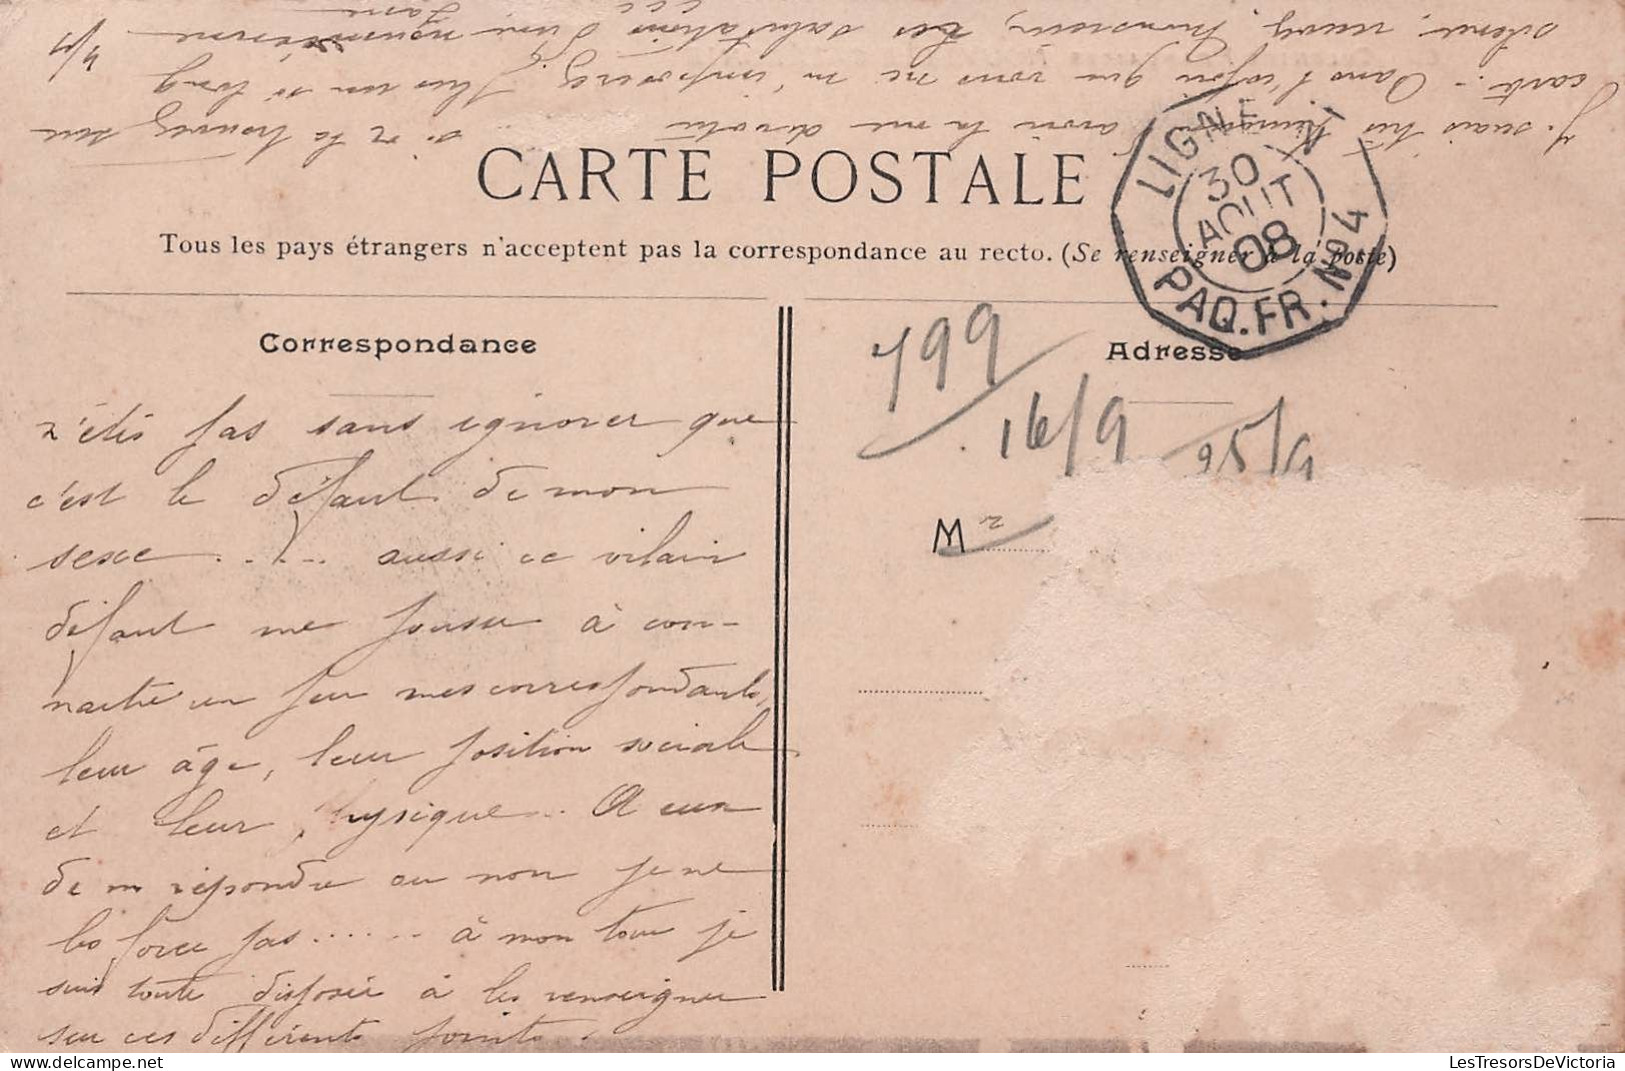 Nouvelle Caledonie - Canaques - Obliteration Paquebot N°4 1908 - Carte Postale Ancienne - New Caledonia